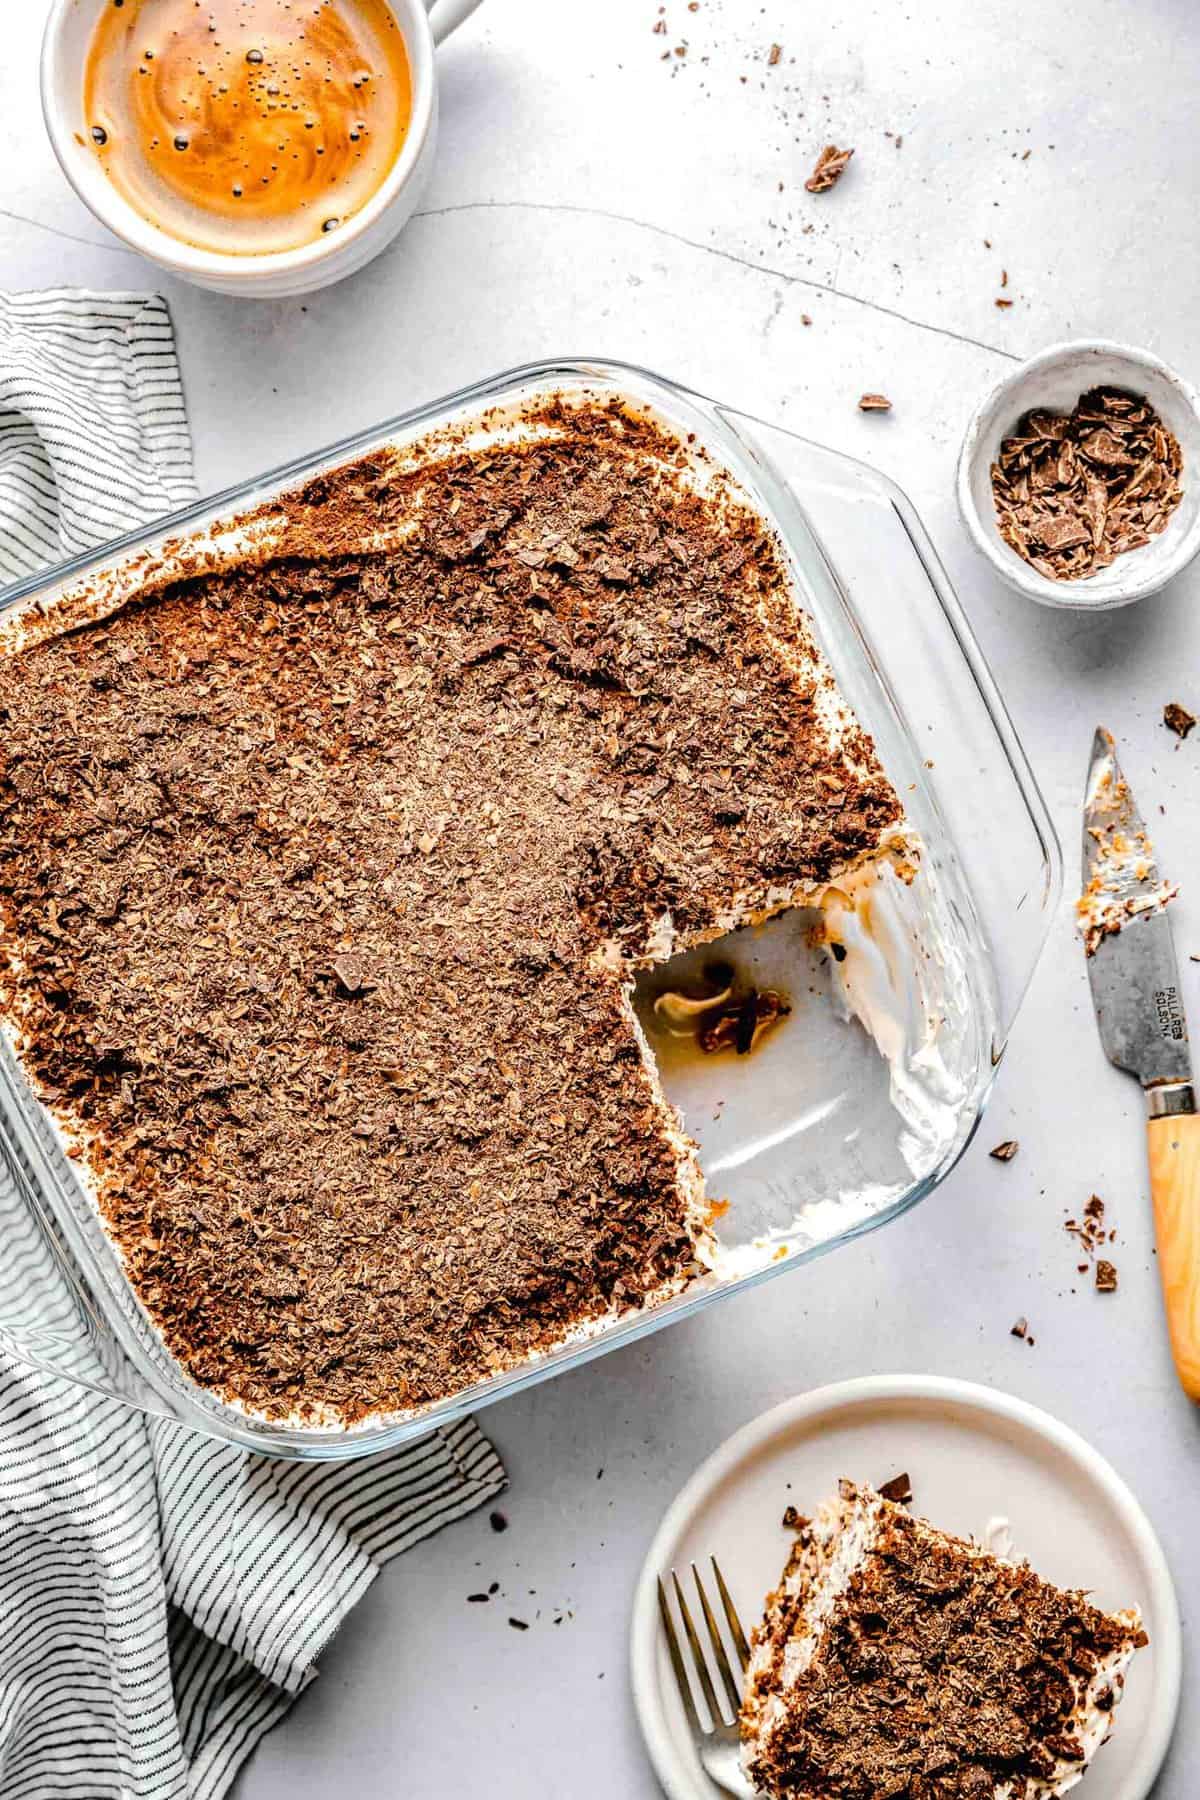 A baking pan of tiramisu with a slice taken out of it near a cup of espresso and a bowl of chopped chocolate.